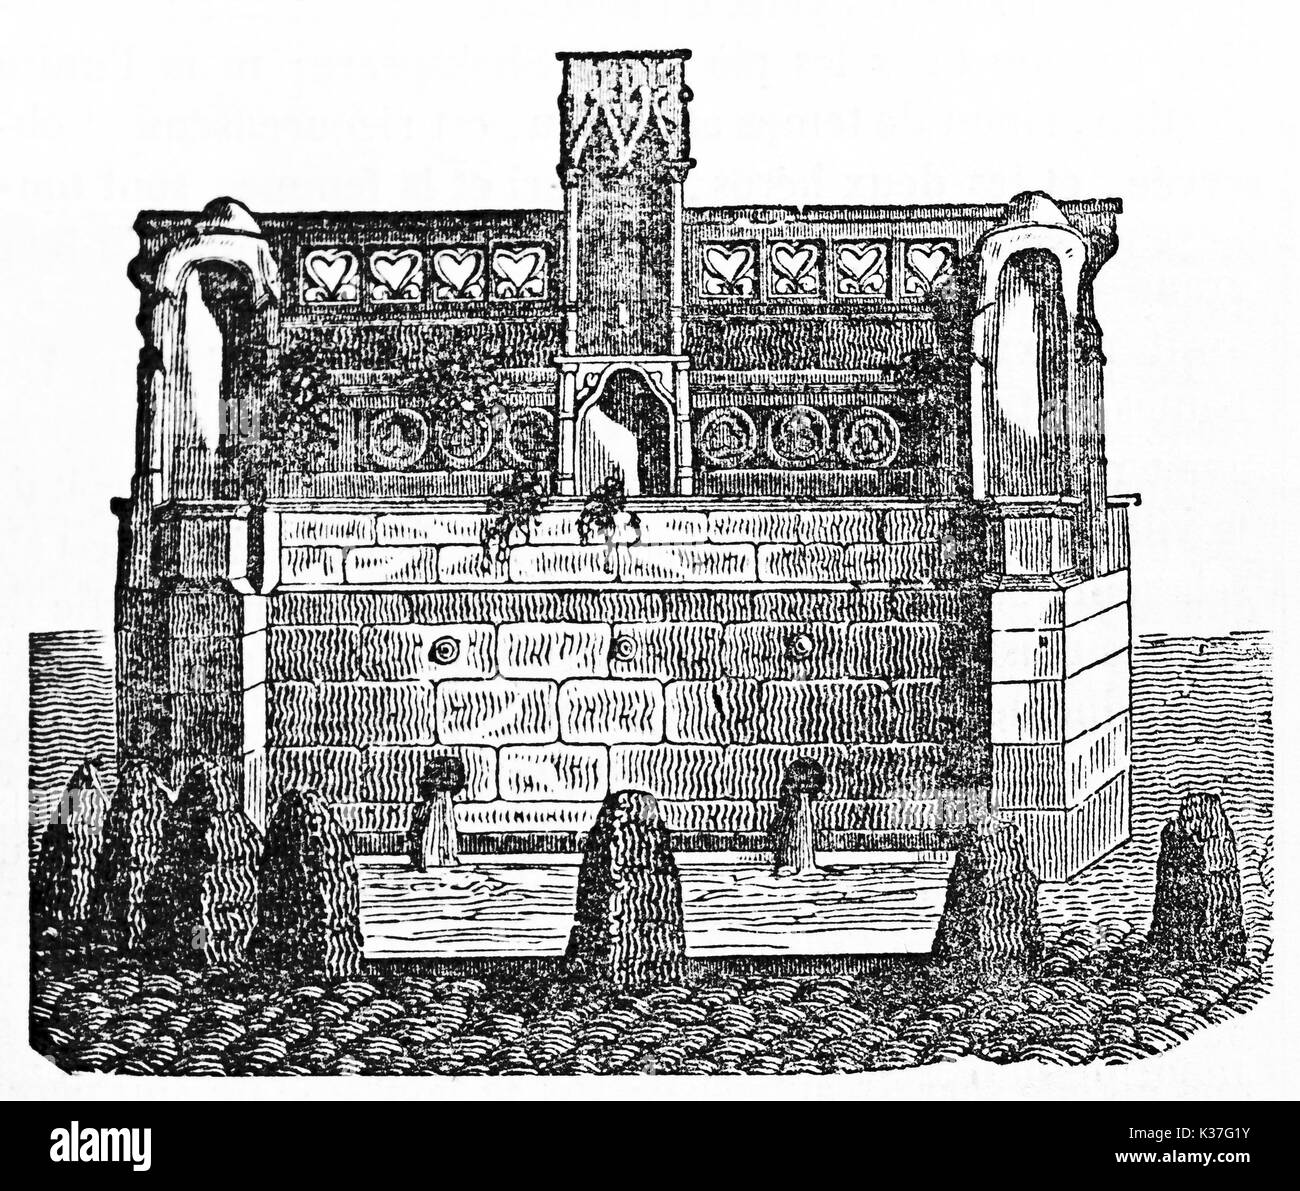 Ancient Louis XII stone fountain in Blois, France (Herb market). Old Illustration by unidentified author, published on Magasin Pittoresque, Paris, 1834 Stock Photo